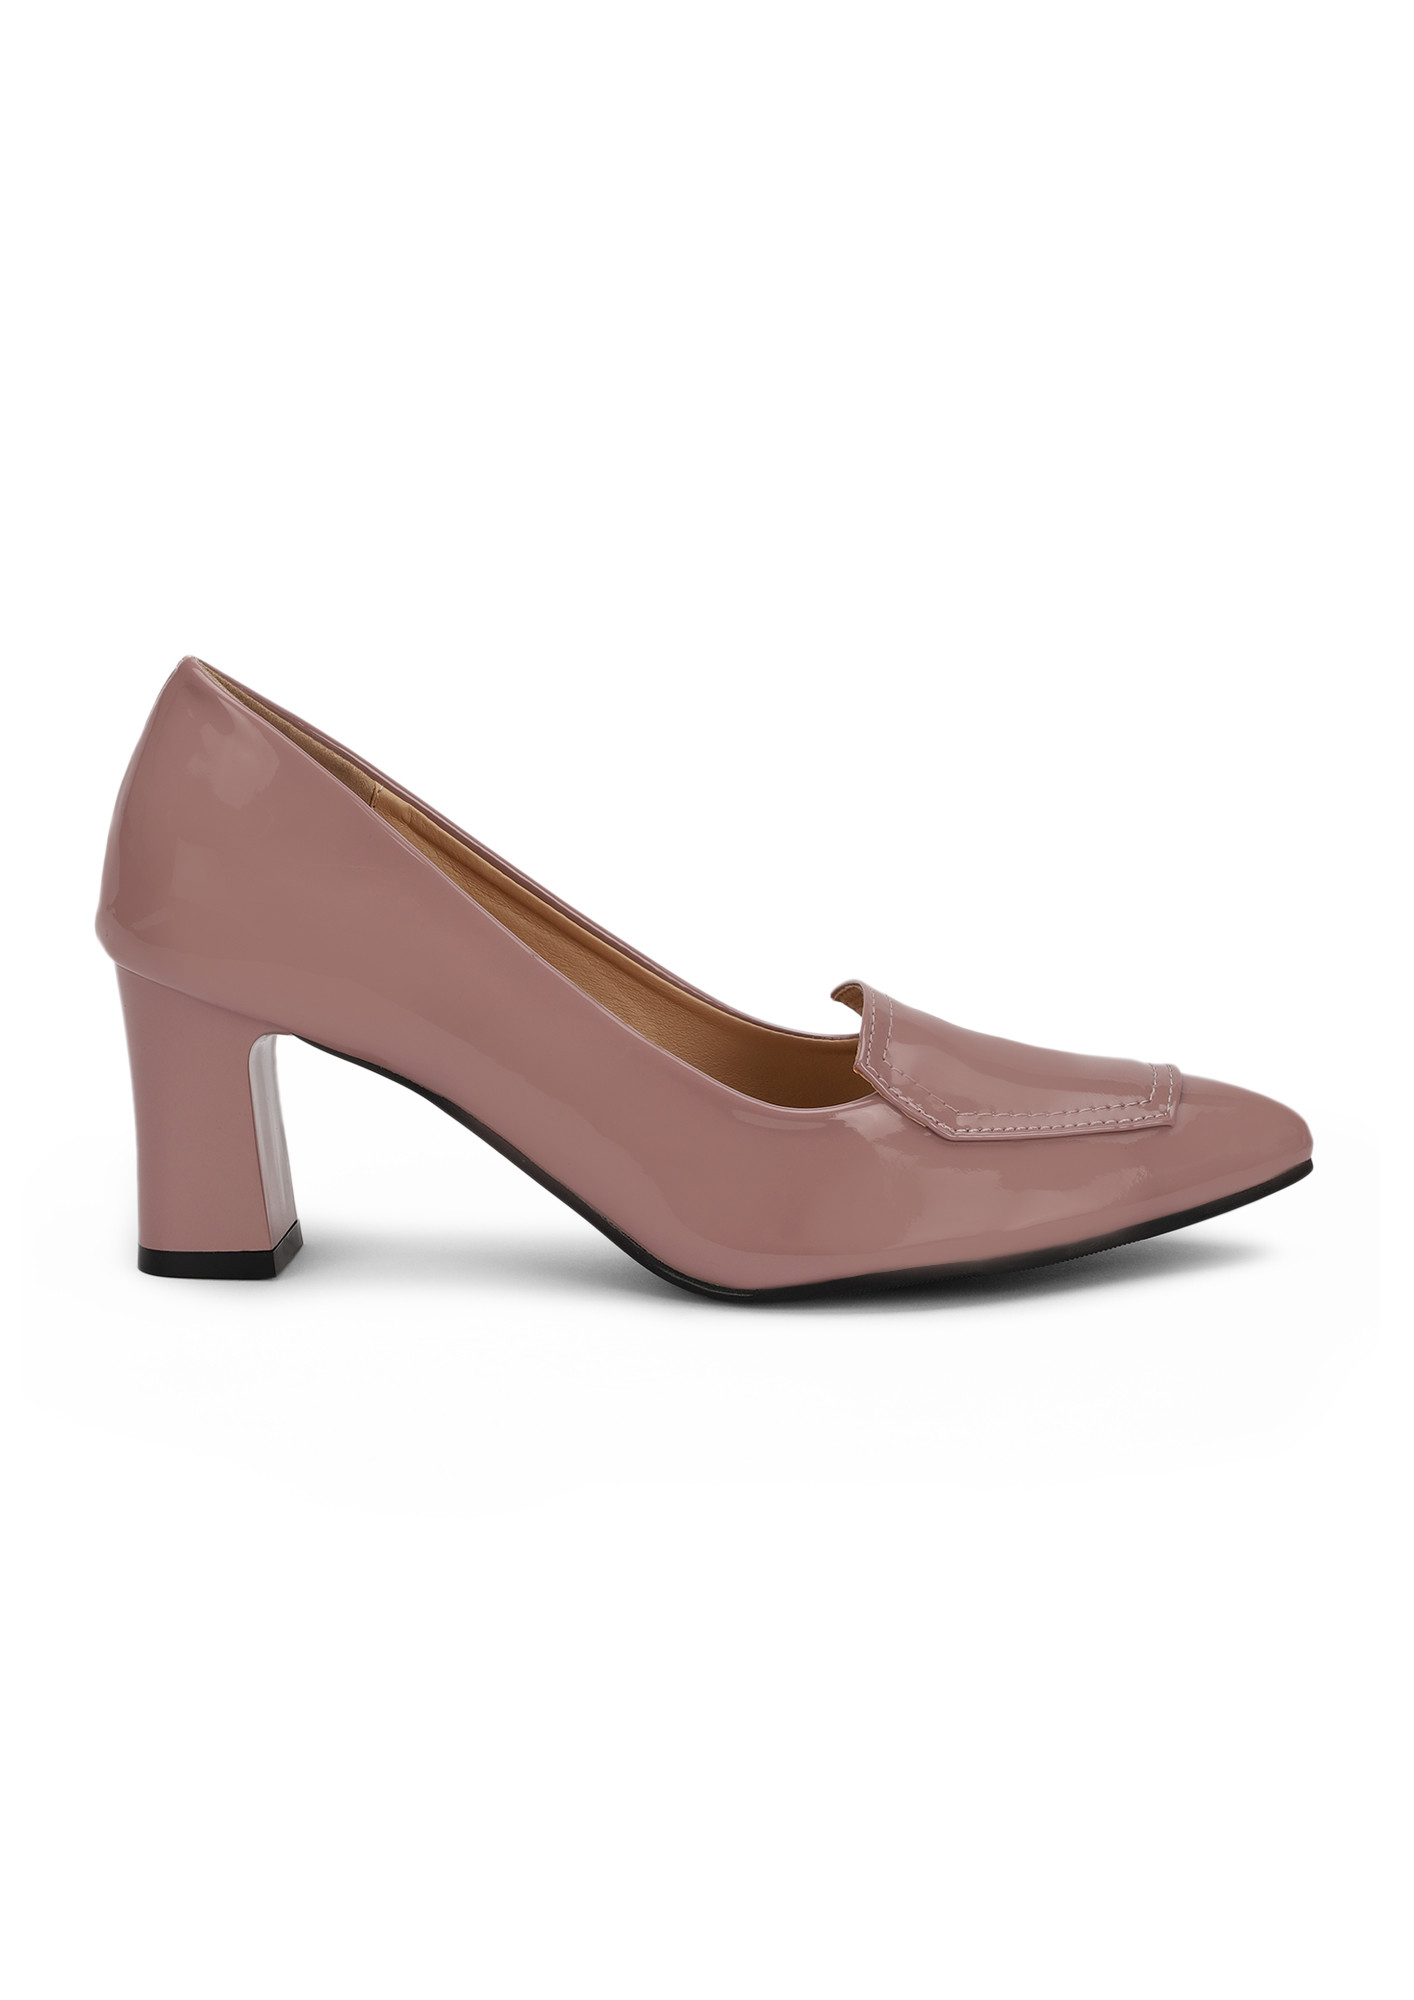 IN-BETWEEN SERIOUS TALKS PINK HEELED SHOES